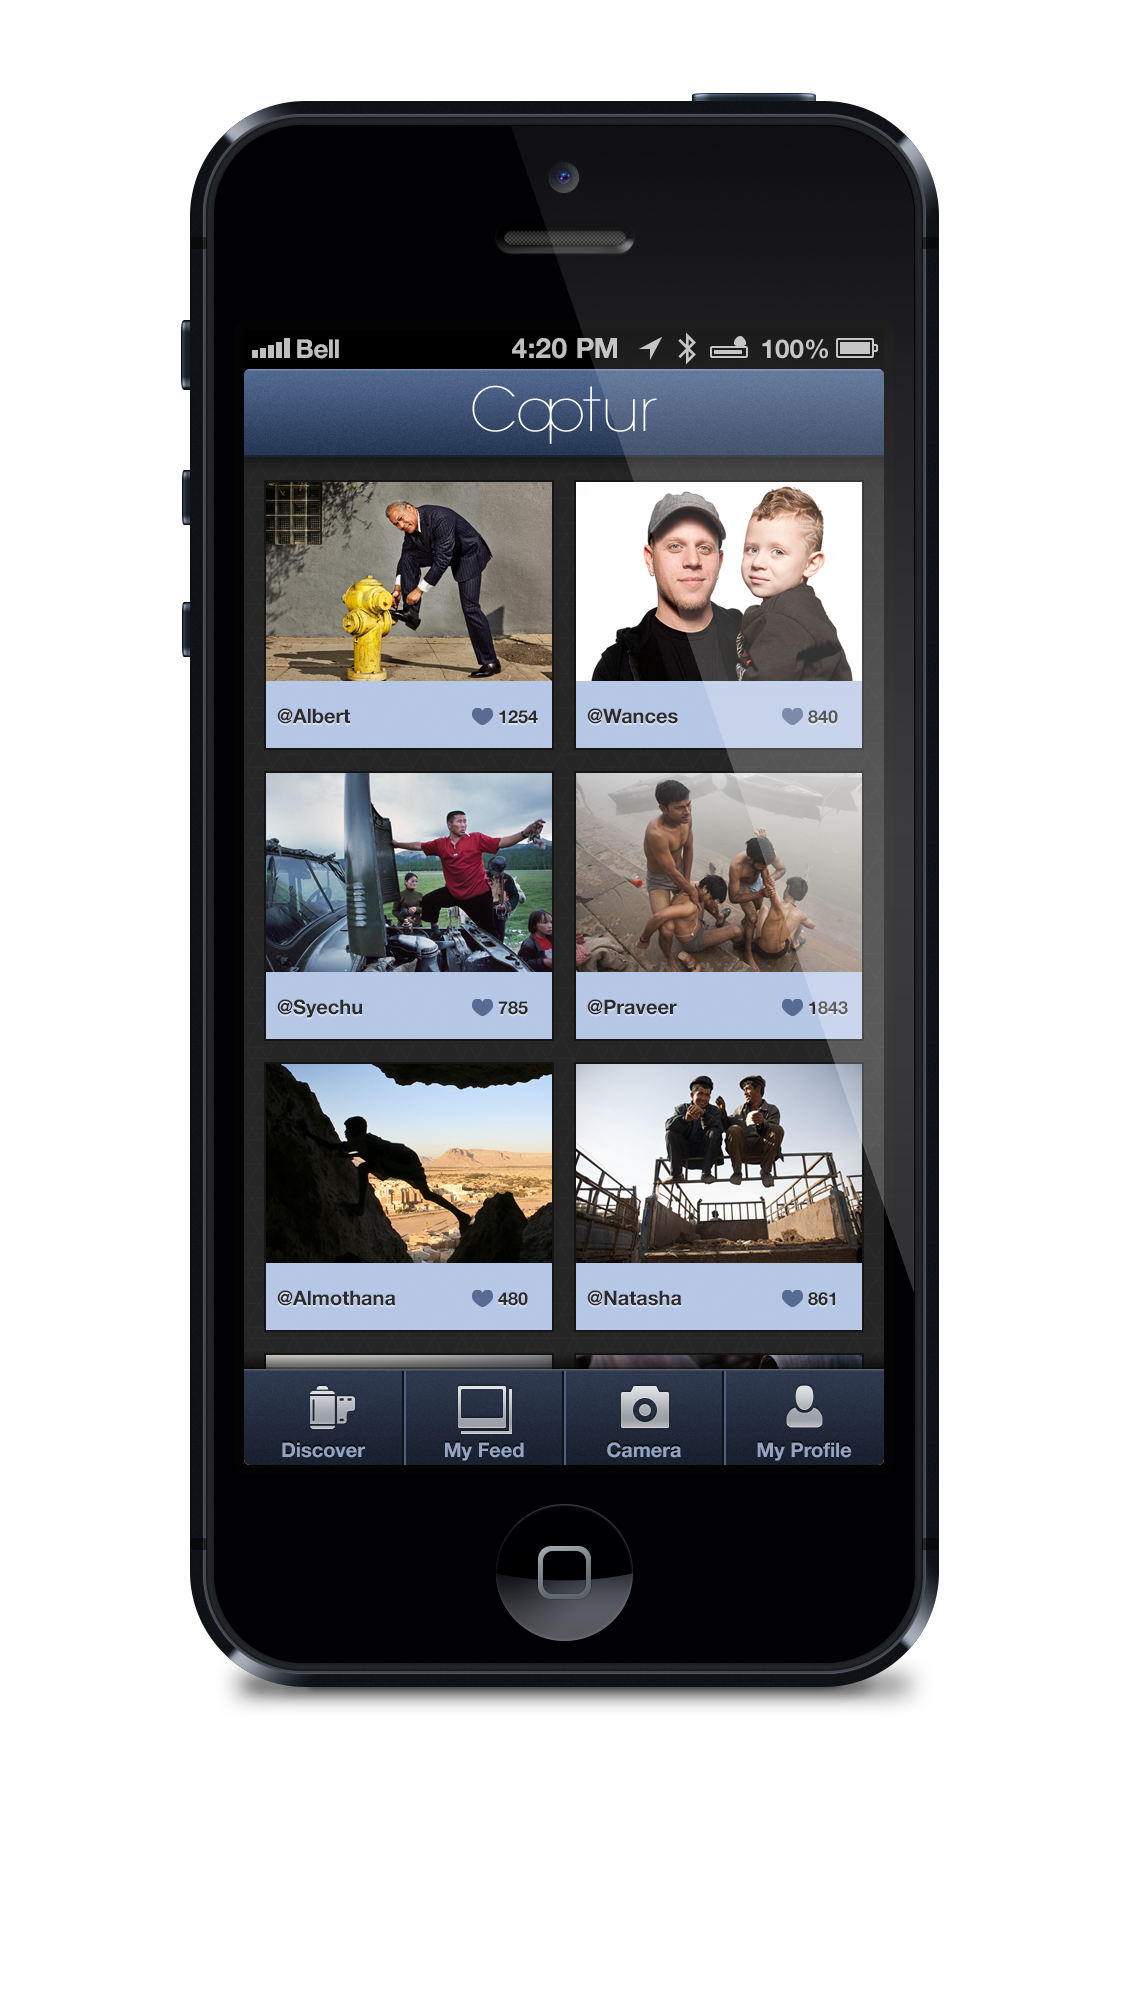 sidharth sidharthsankh capture user interface user exprience  photo application photo & video iOS icon